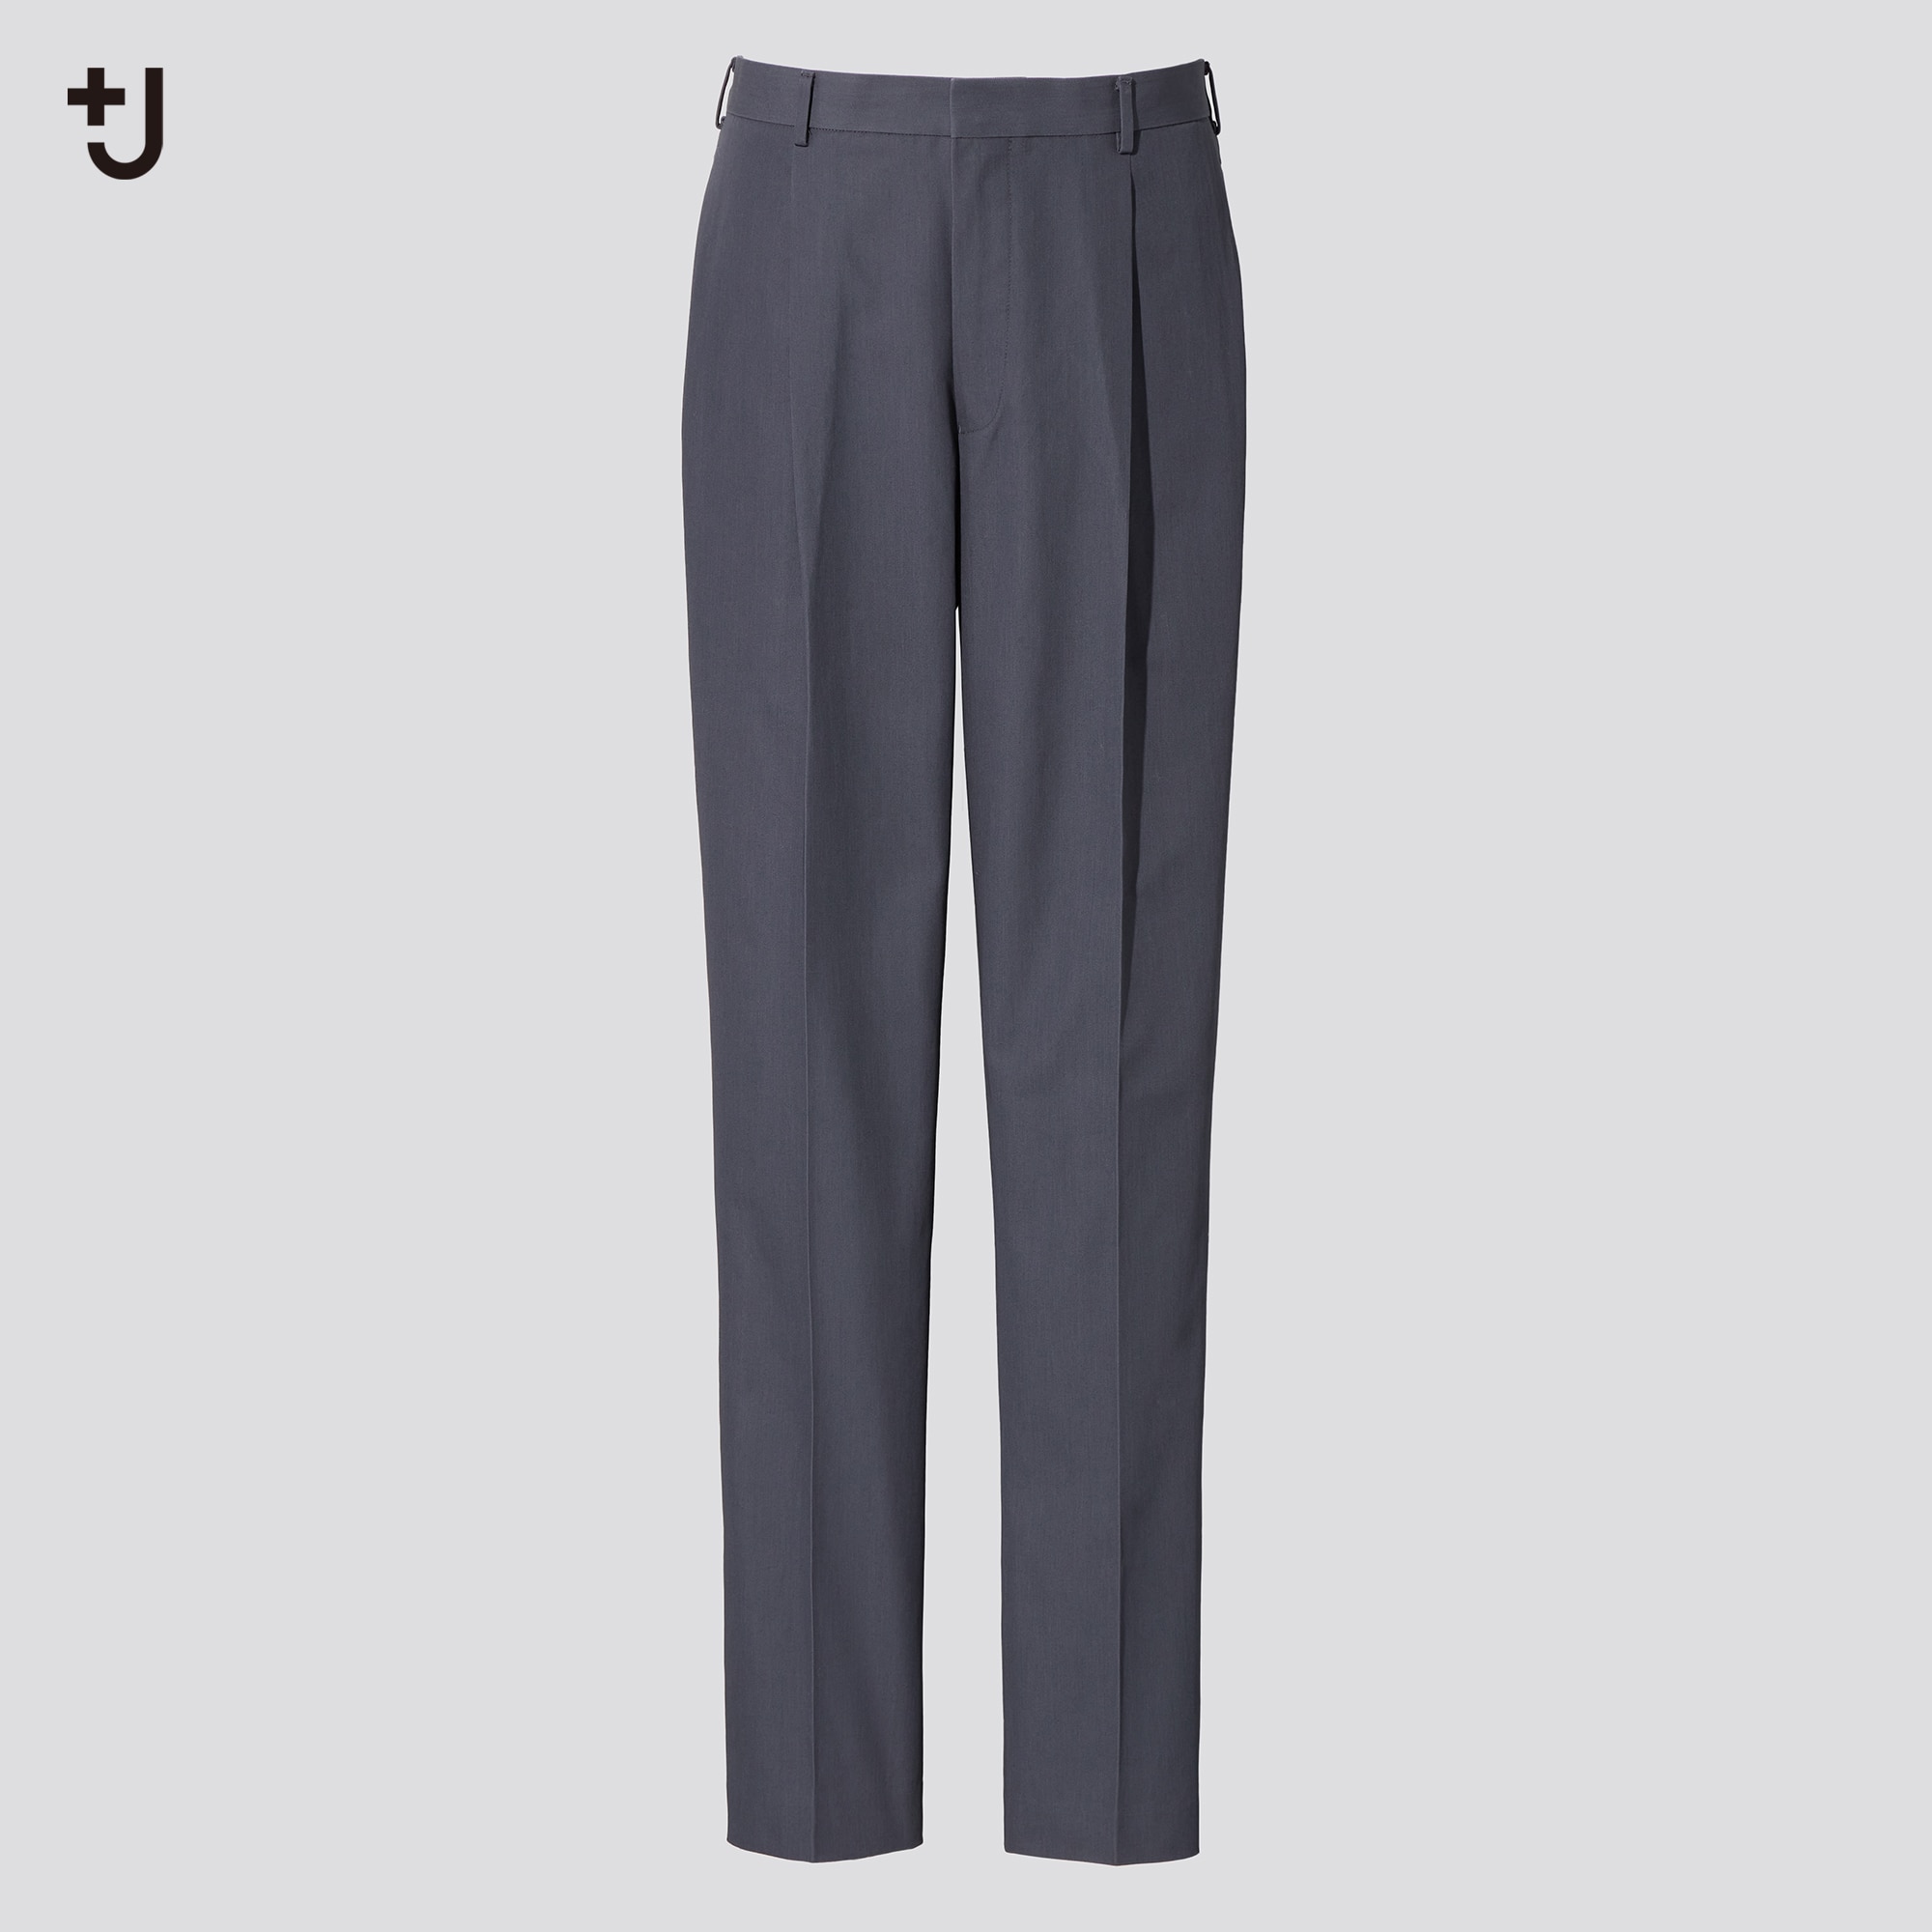 Share 76+ tapered trouser meaning latest - in.cdgdbentre